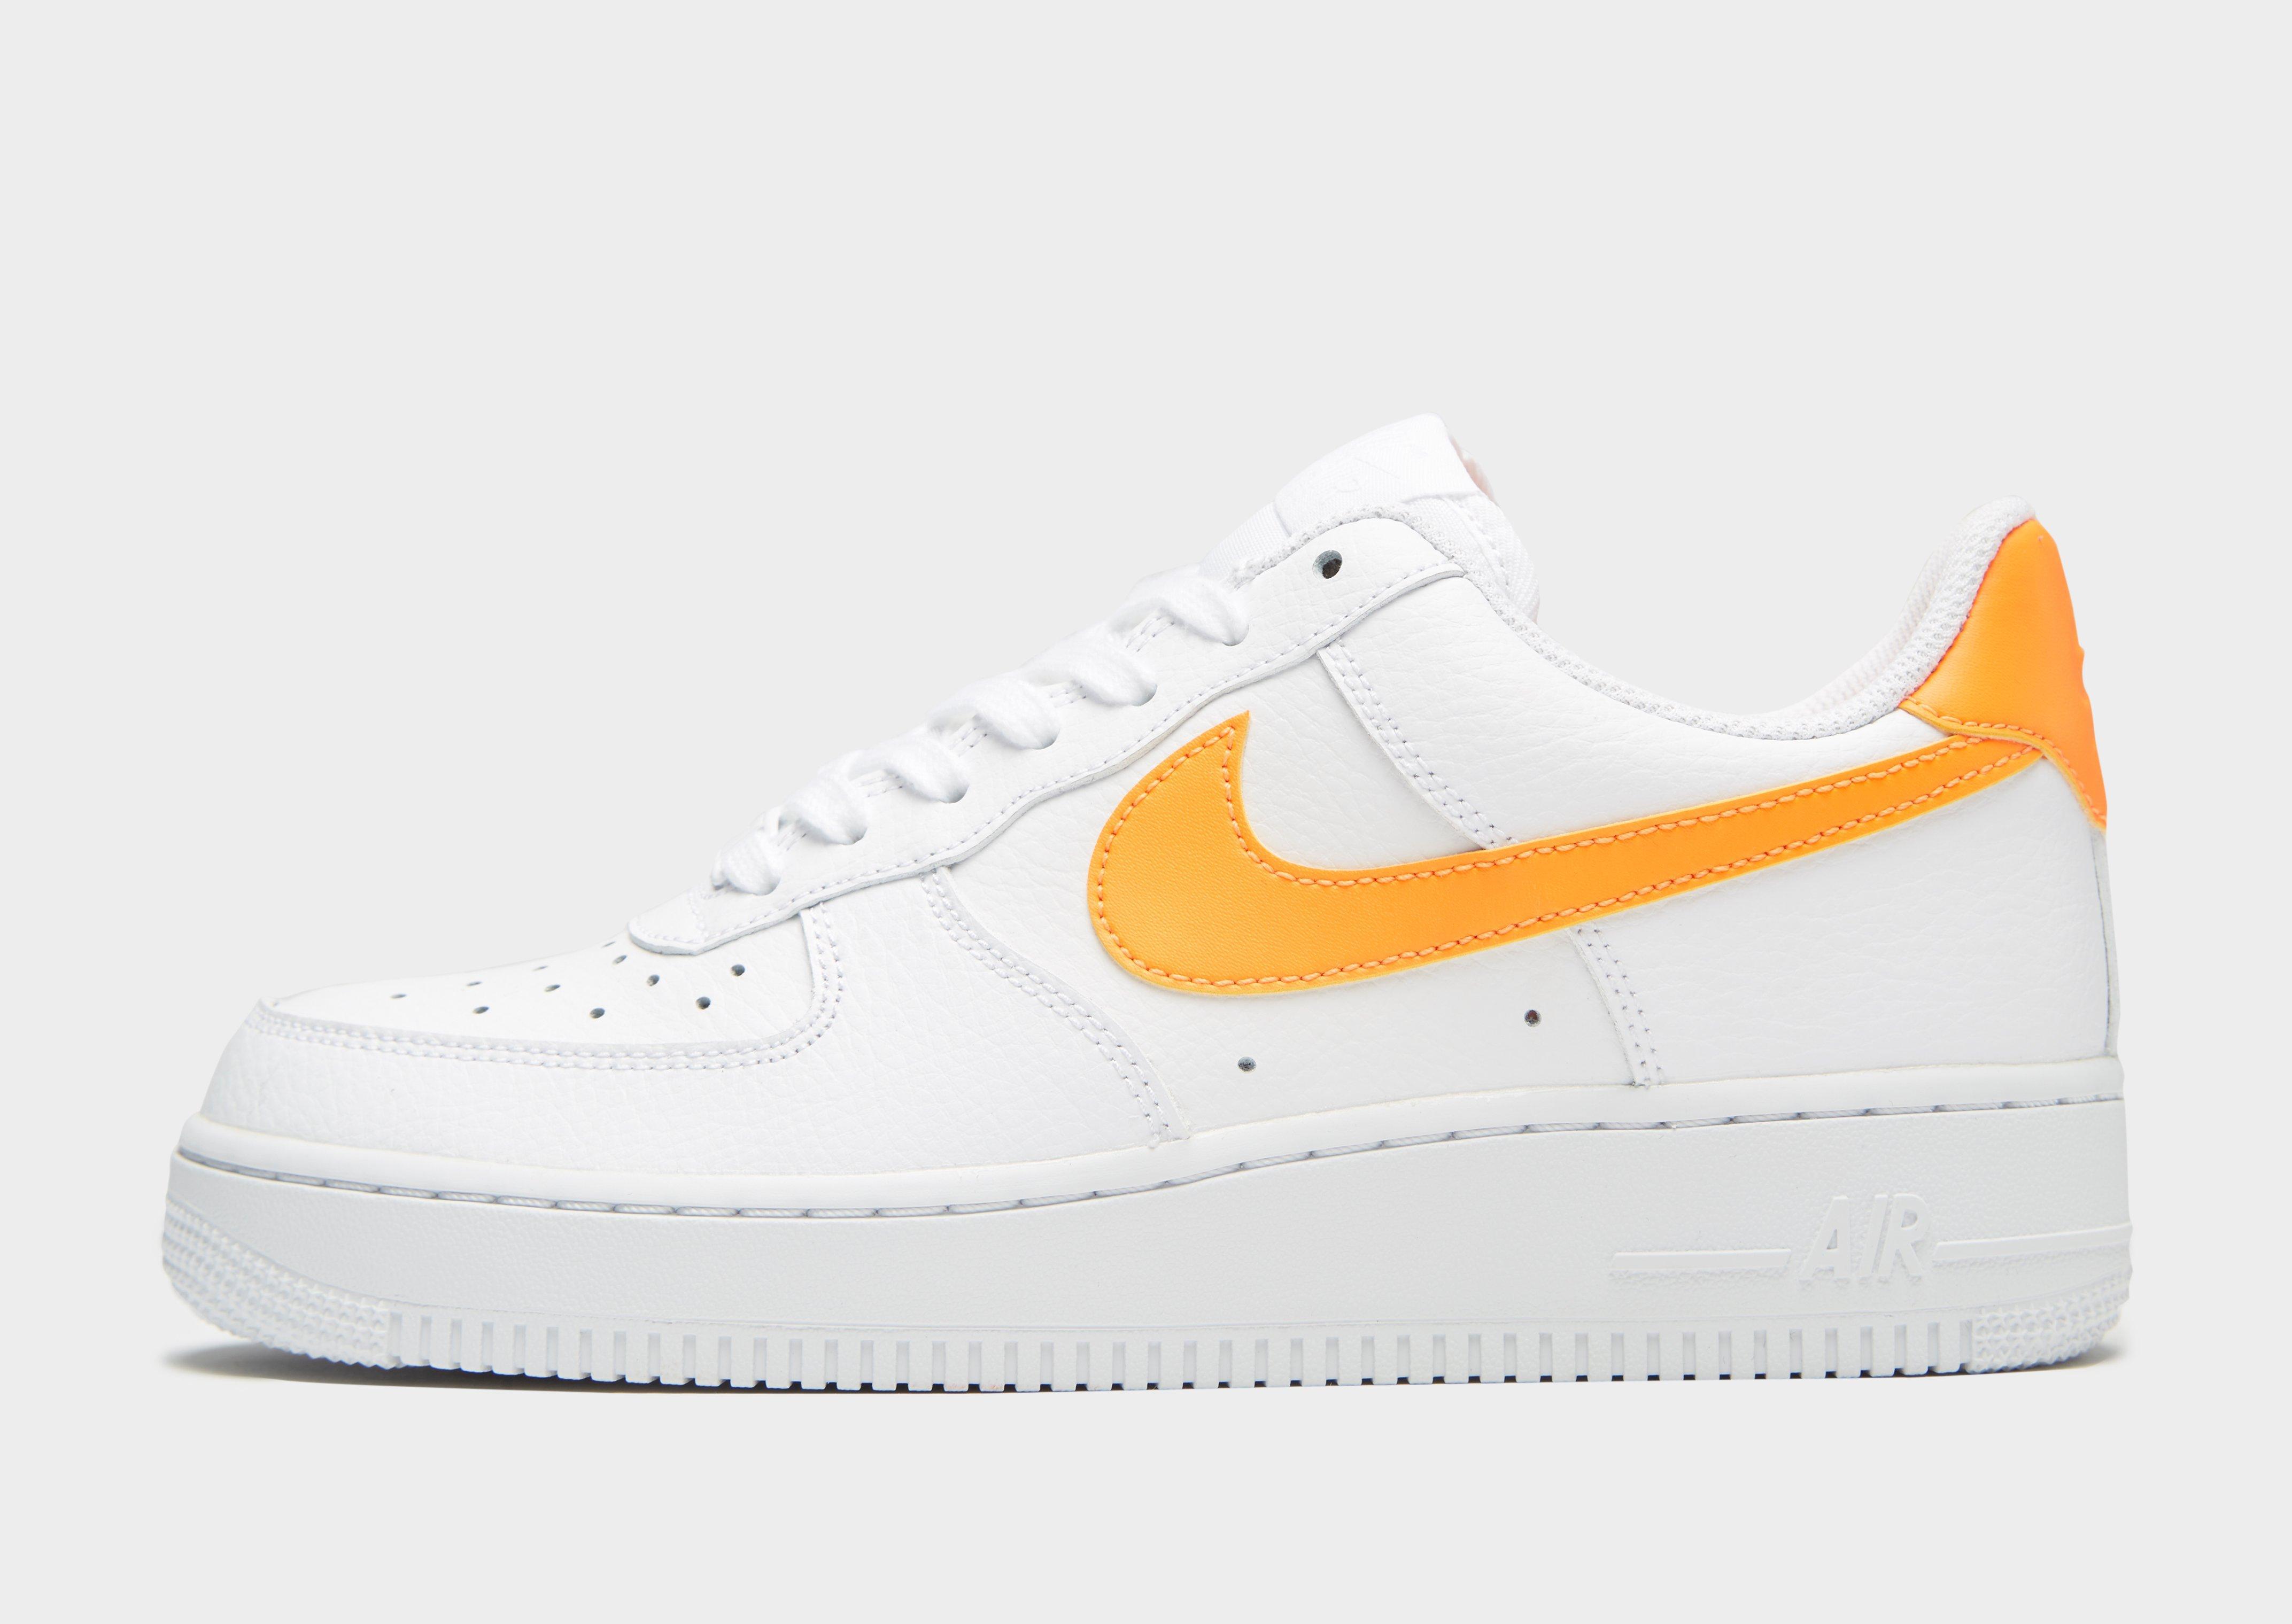 Nike Leather Air Force 1 '07 Lv8 in White/Orange (White) - Lyst